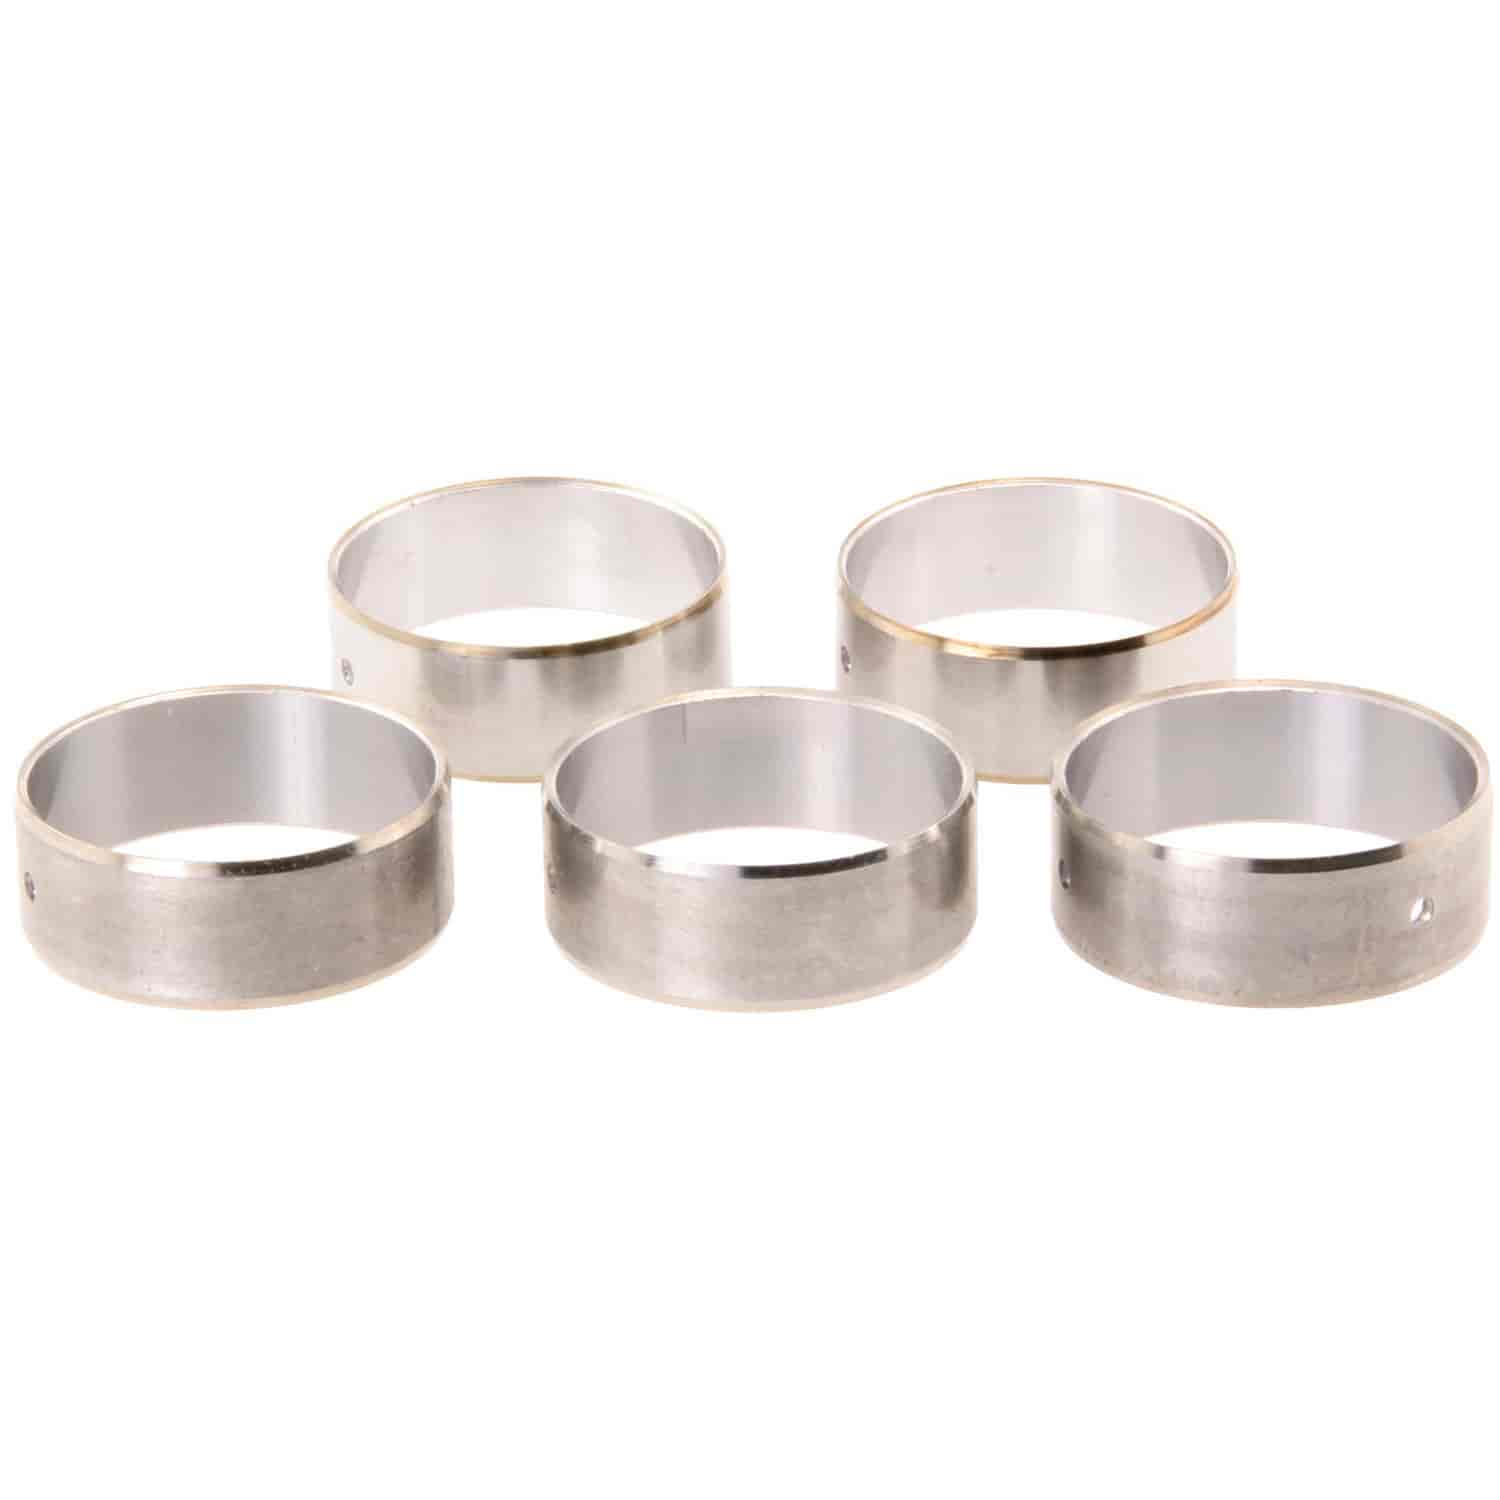 Cam Bearing Set Chevy 1967-2002 V8 267/283/302/305/307/327/350/400 (4.4/4.6/5.0/5.4/5.7/6.6L) with -.010" Undersize